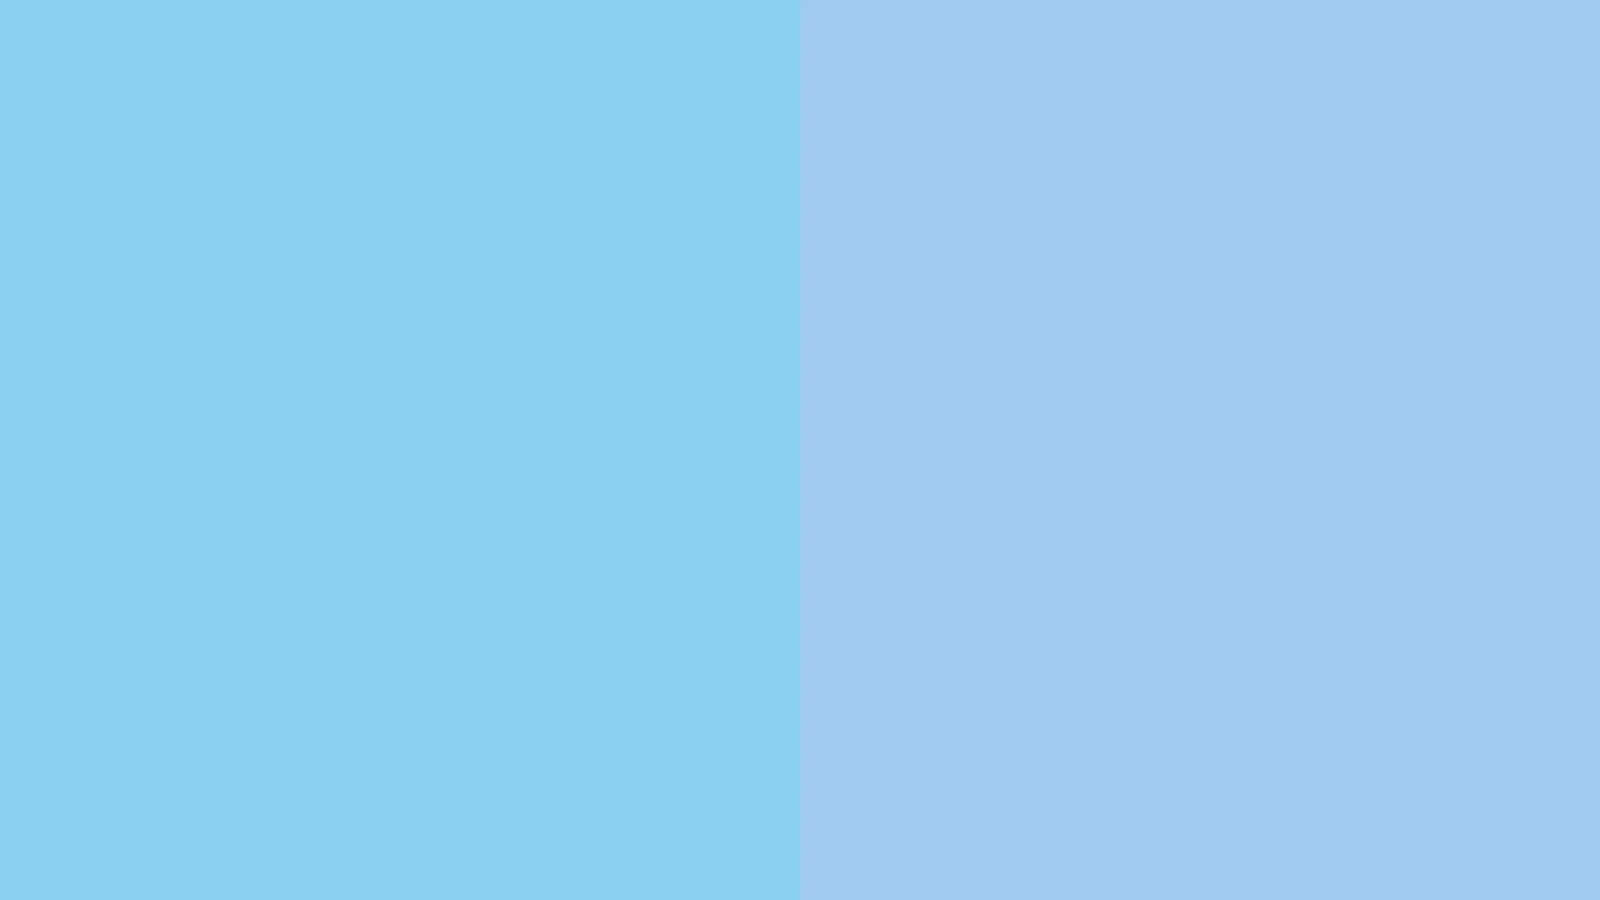 Beautiful Solid Light Blue Background